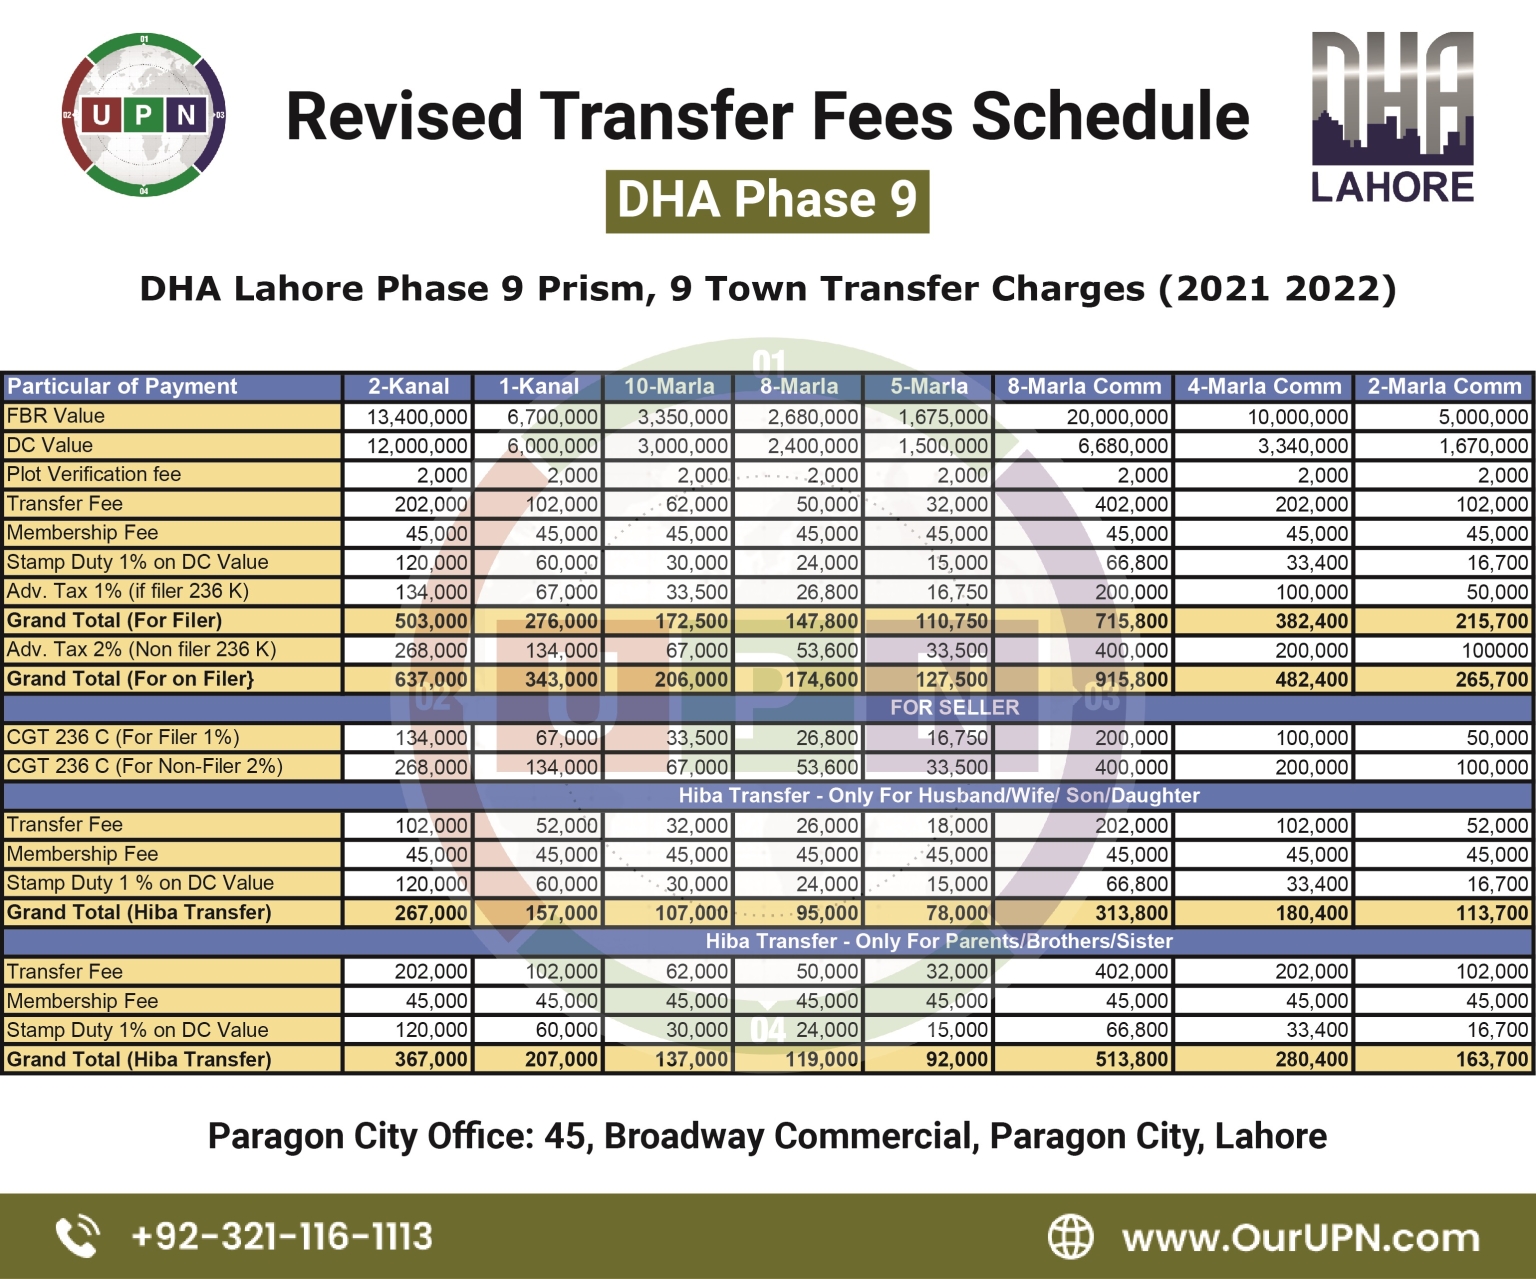 DHA Lahore Phase 9 Transfer Fees Schedule 20212022 UPN